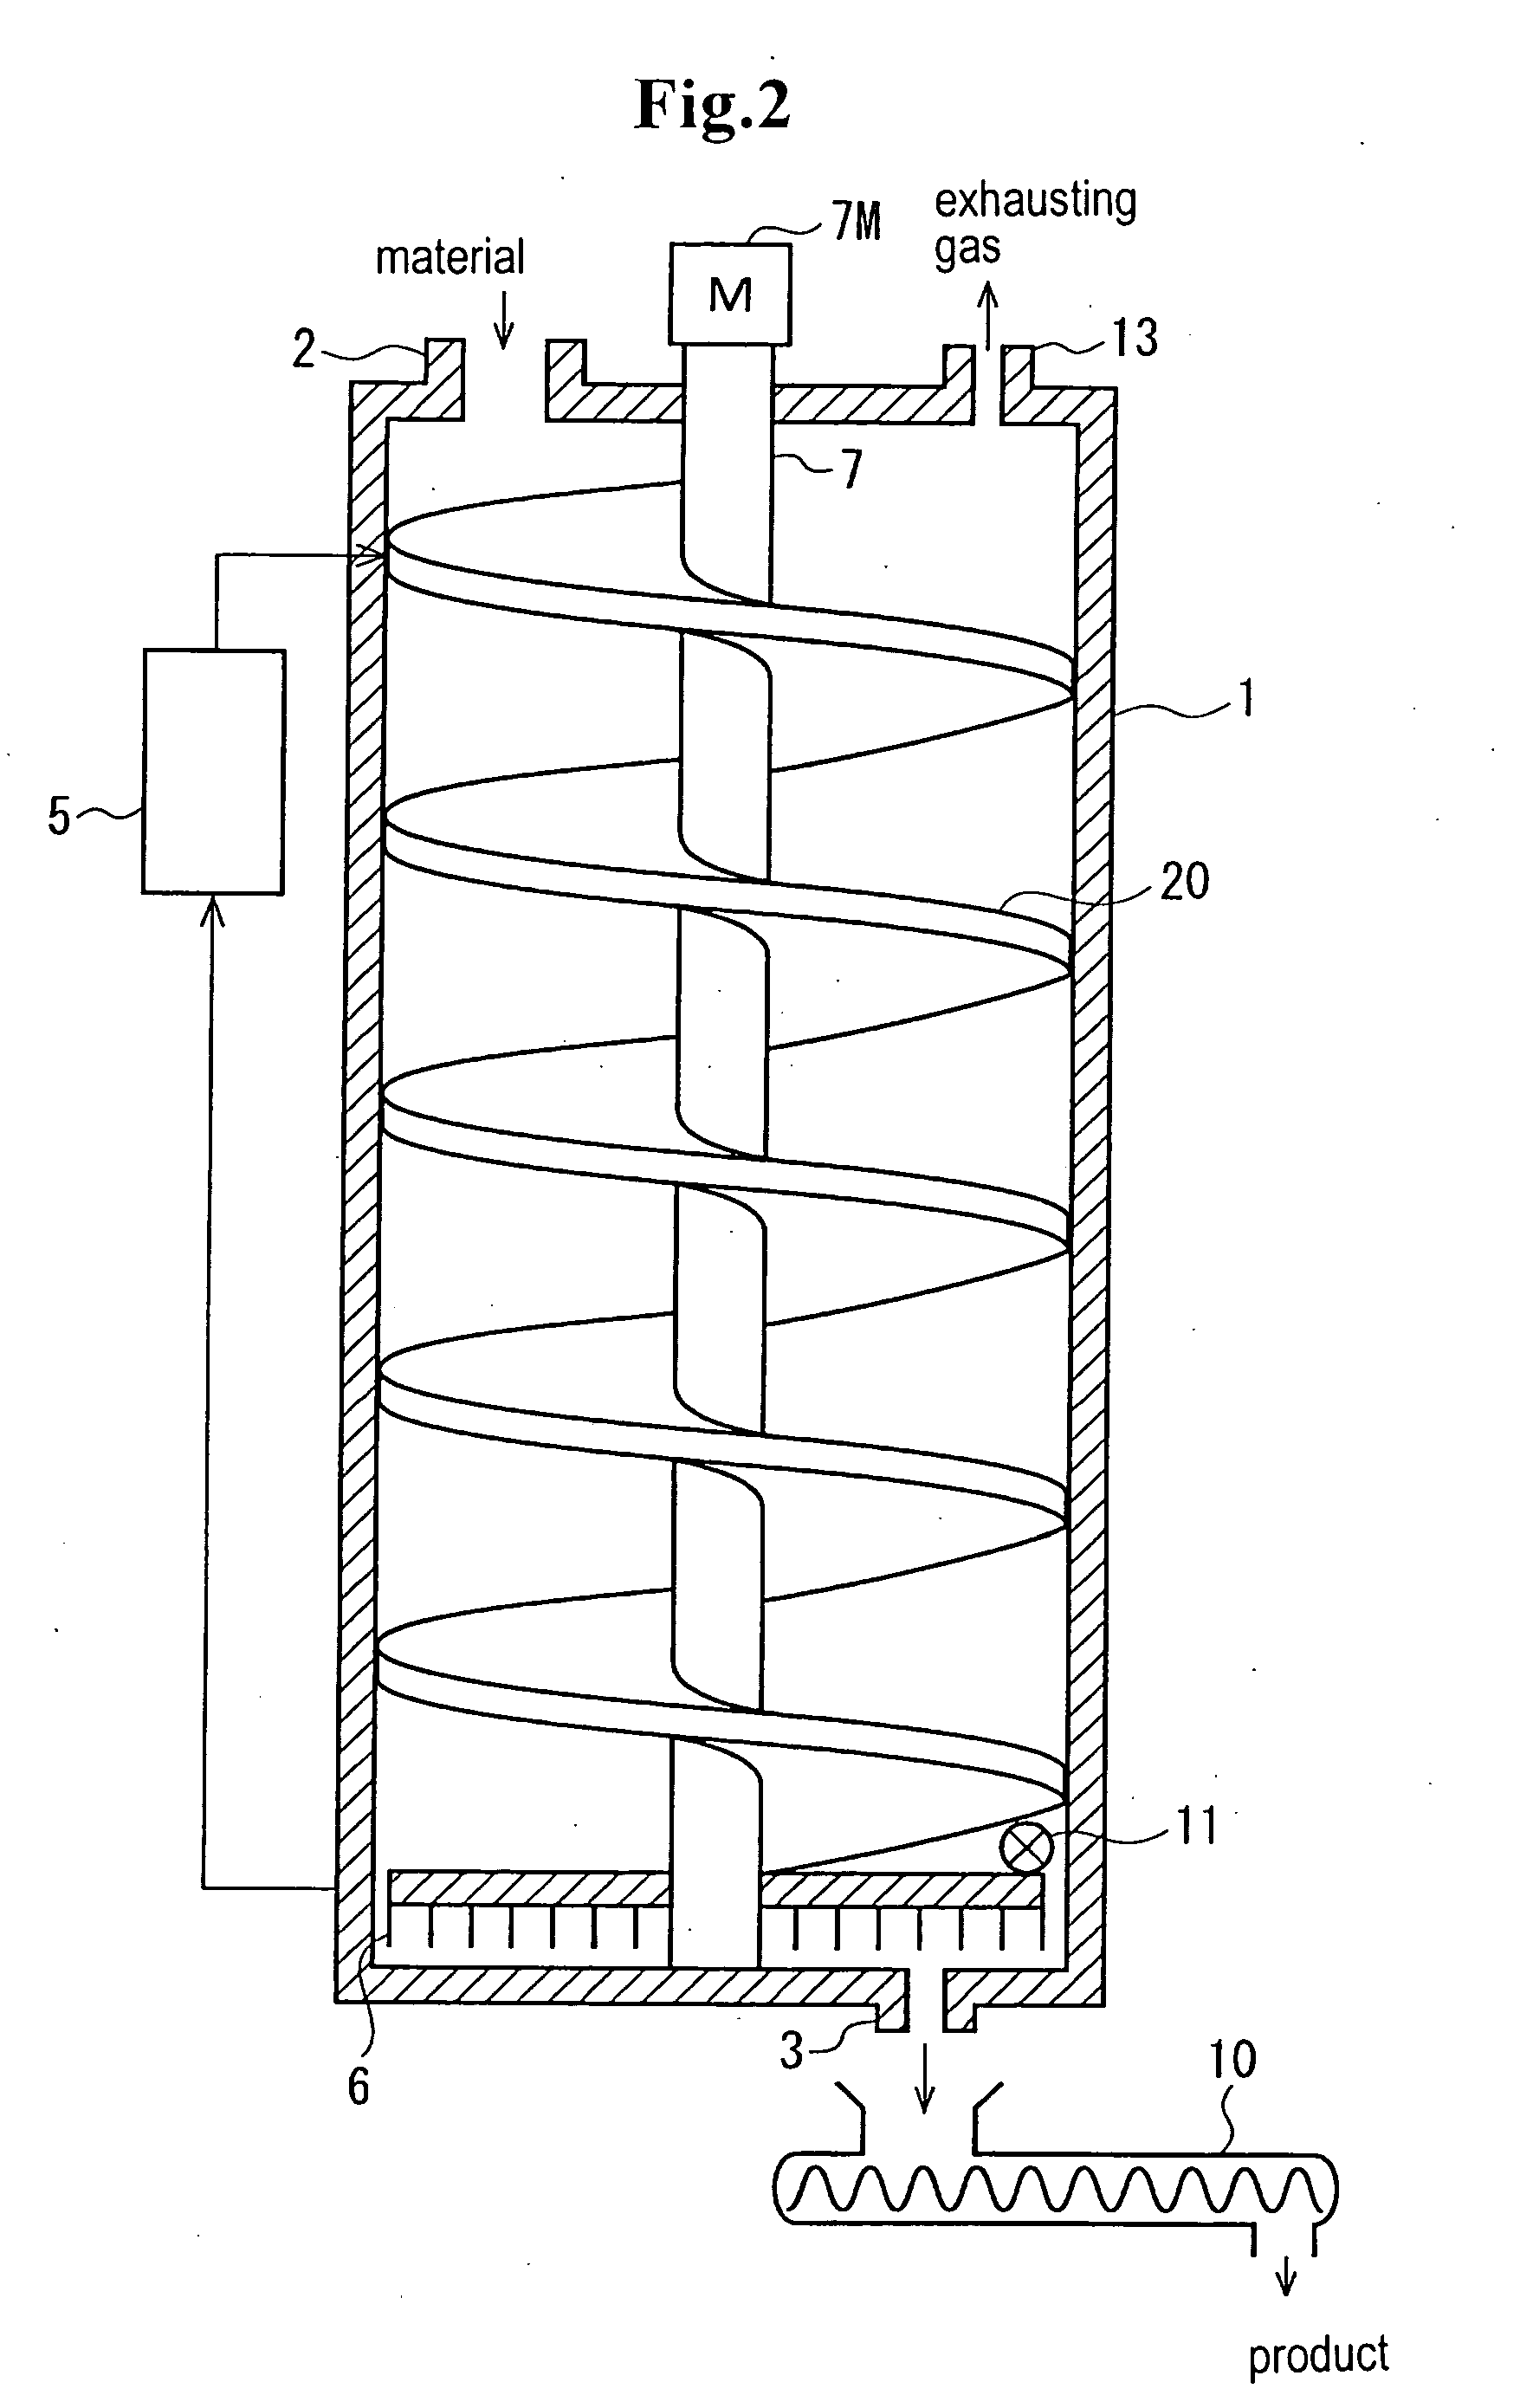 Apparatus and method for producing matured compost-like material